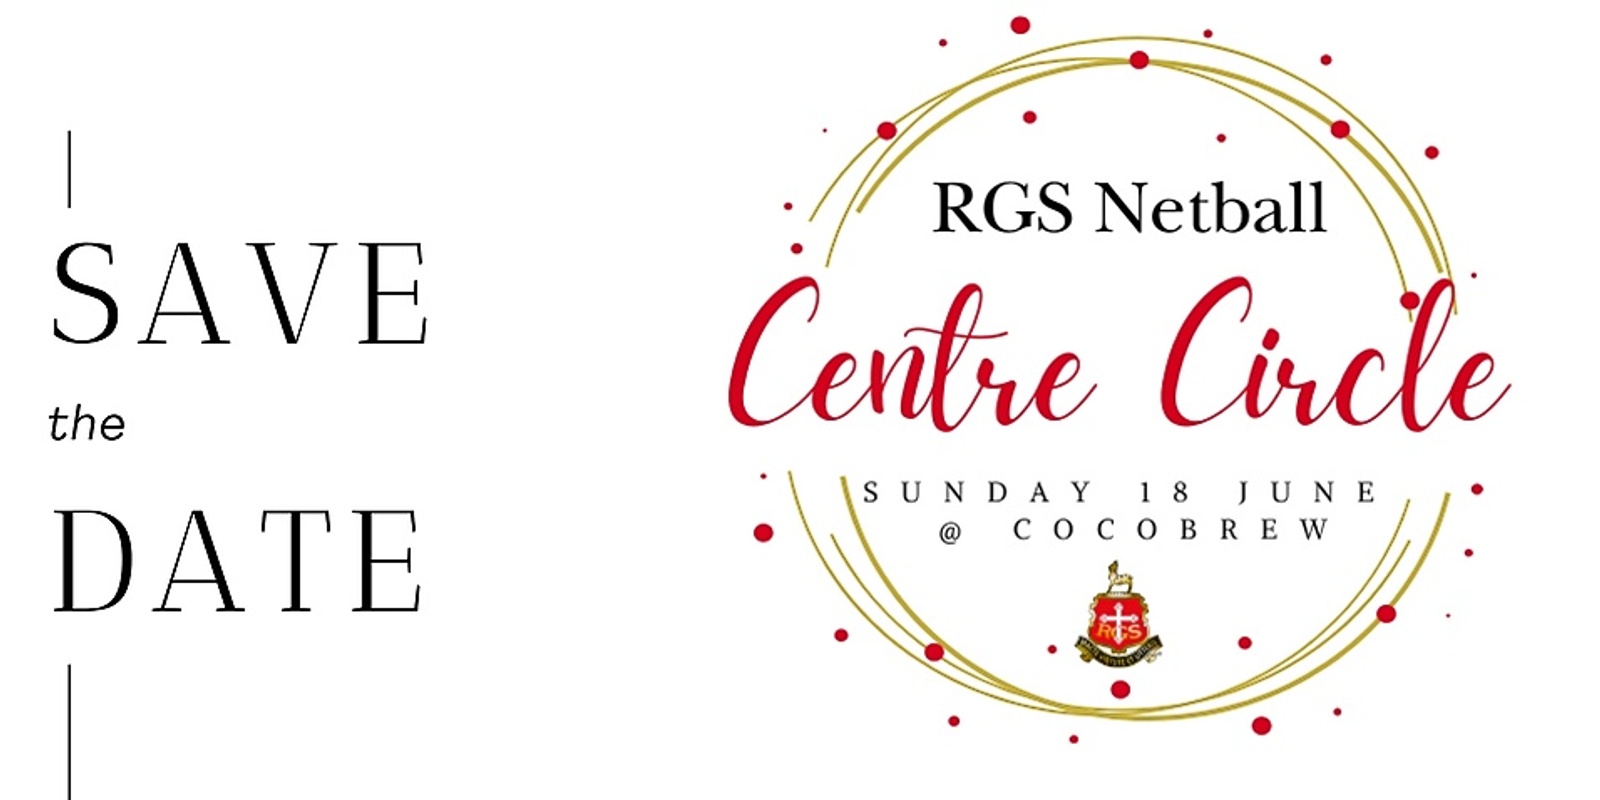 Banner image for RGS Netball Club Centre Circle